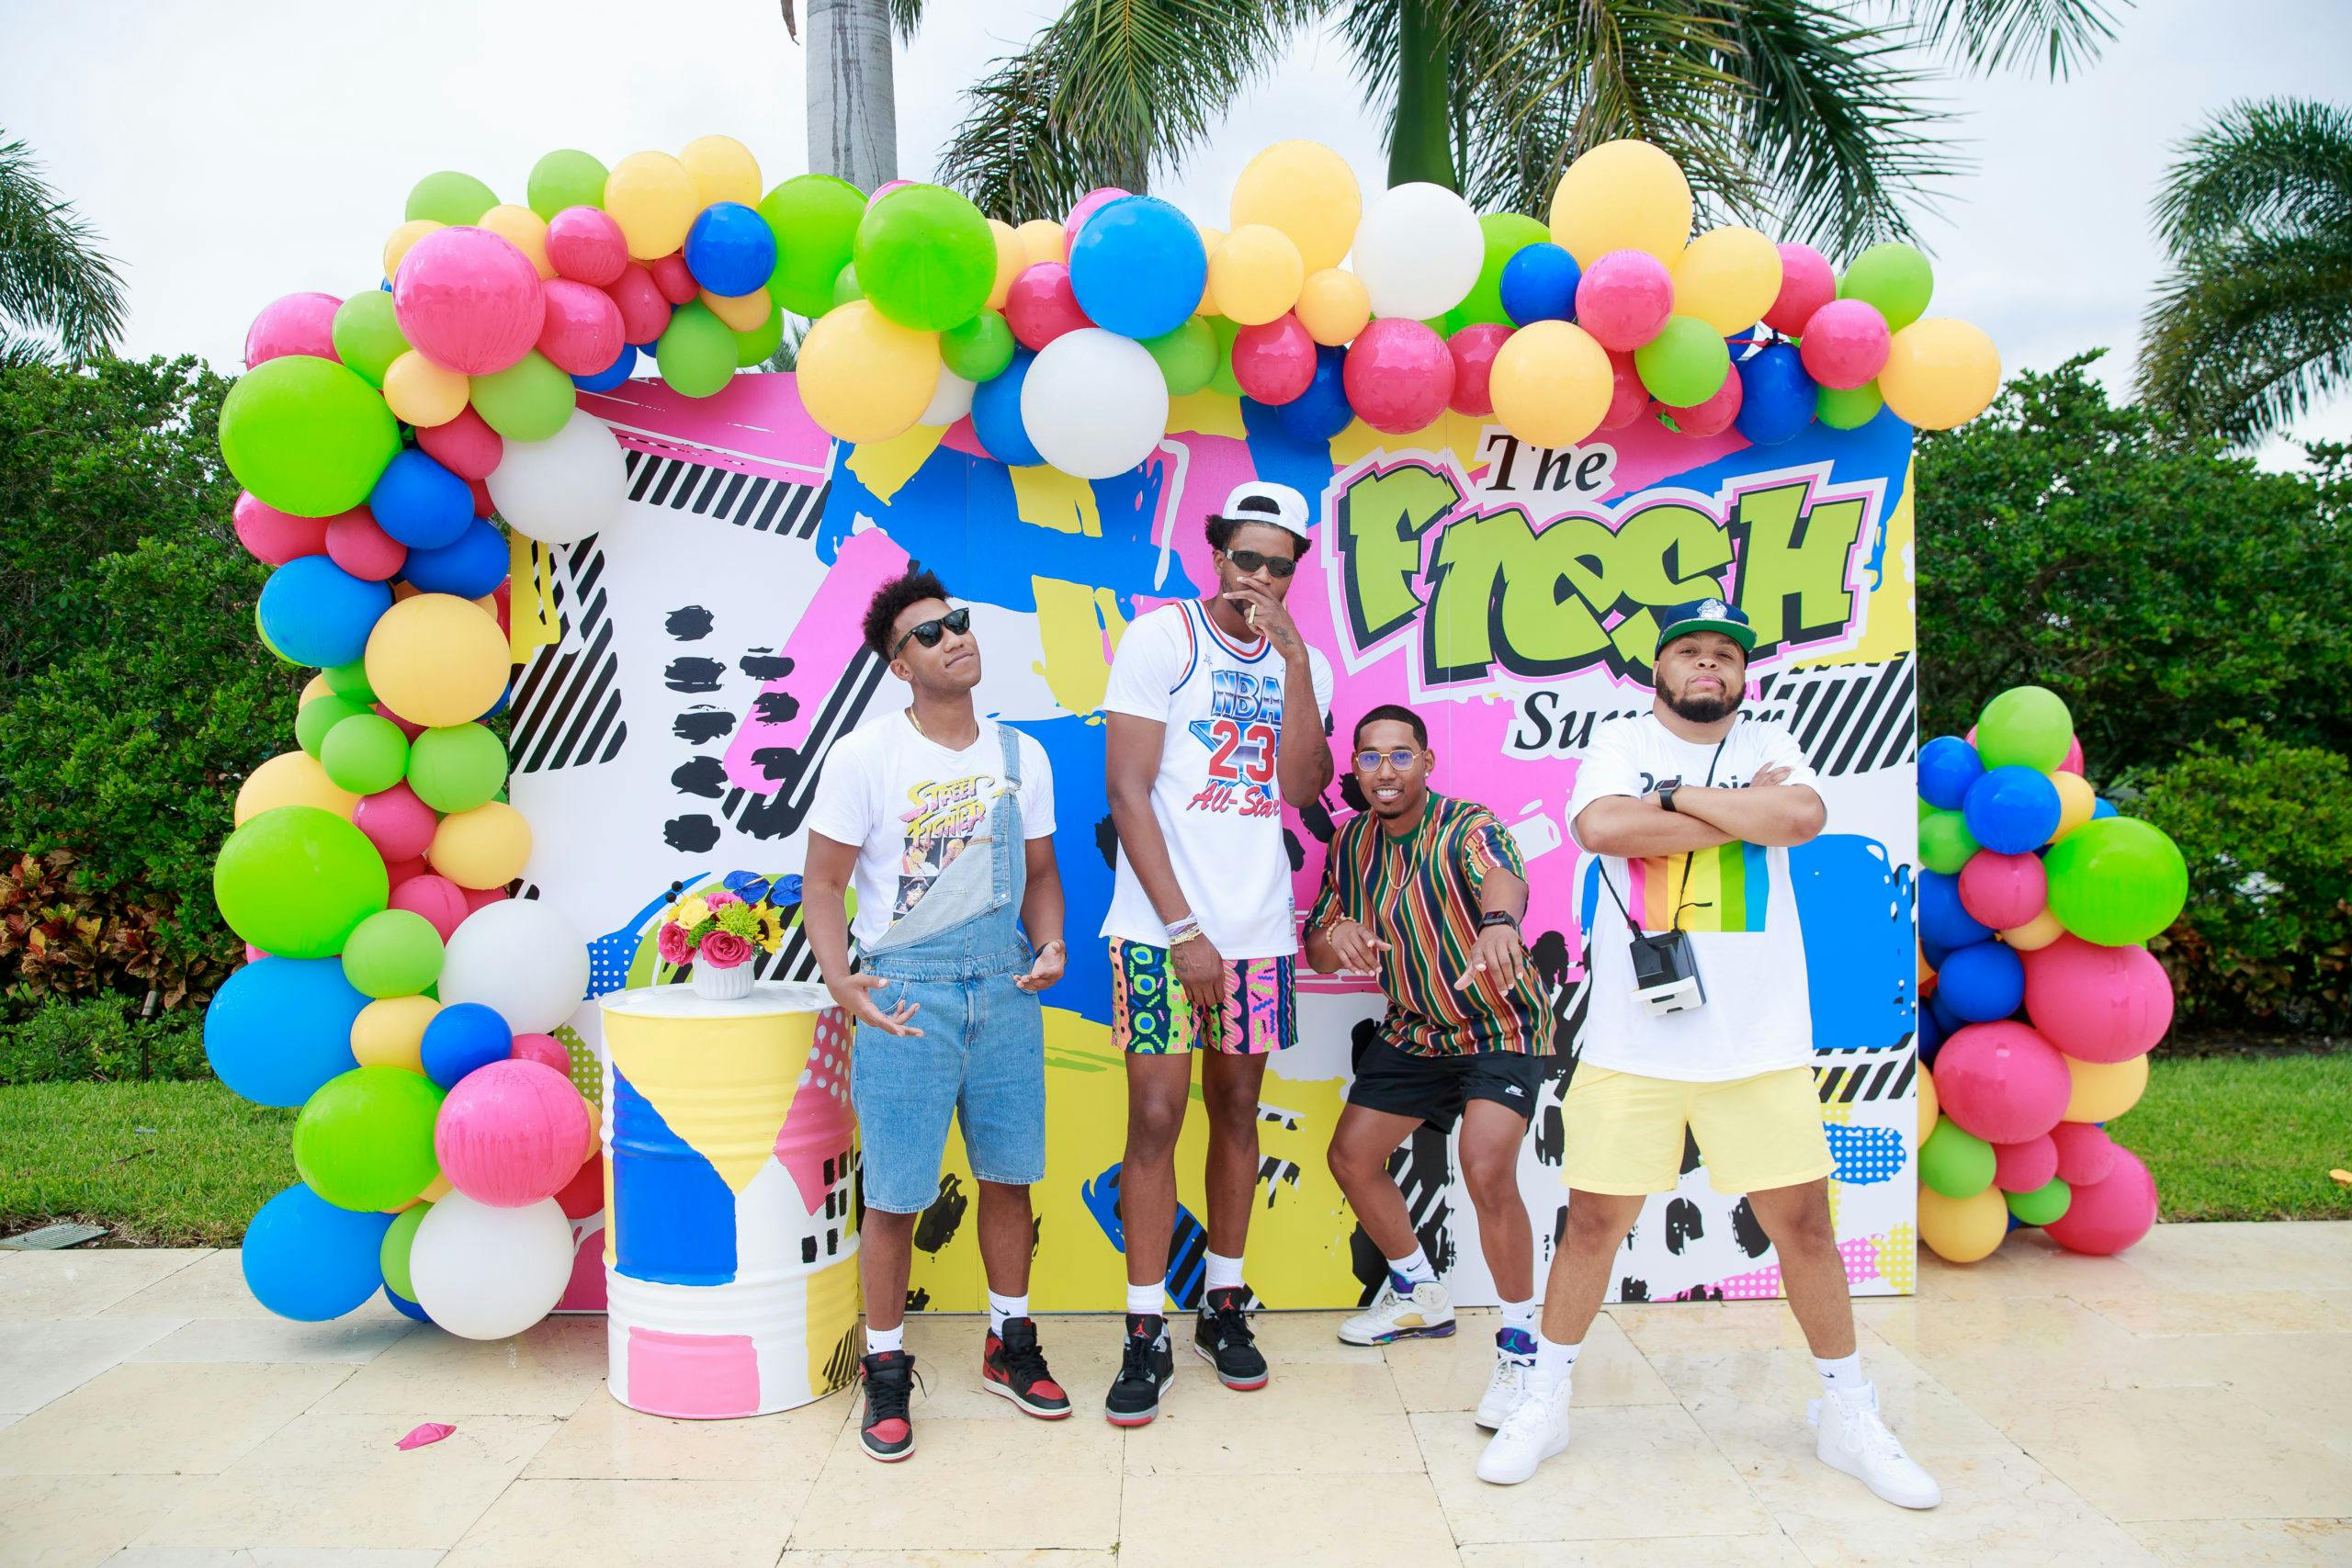 https://wp-media-partyslate.imgix.net/2022/12/fresh-prince-of-bel-air-themed-birthday-party-at-a-private_1145470-scaled.jpg?auto=compress%2Cformat&ixlib=php-3.3.1